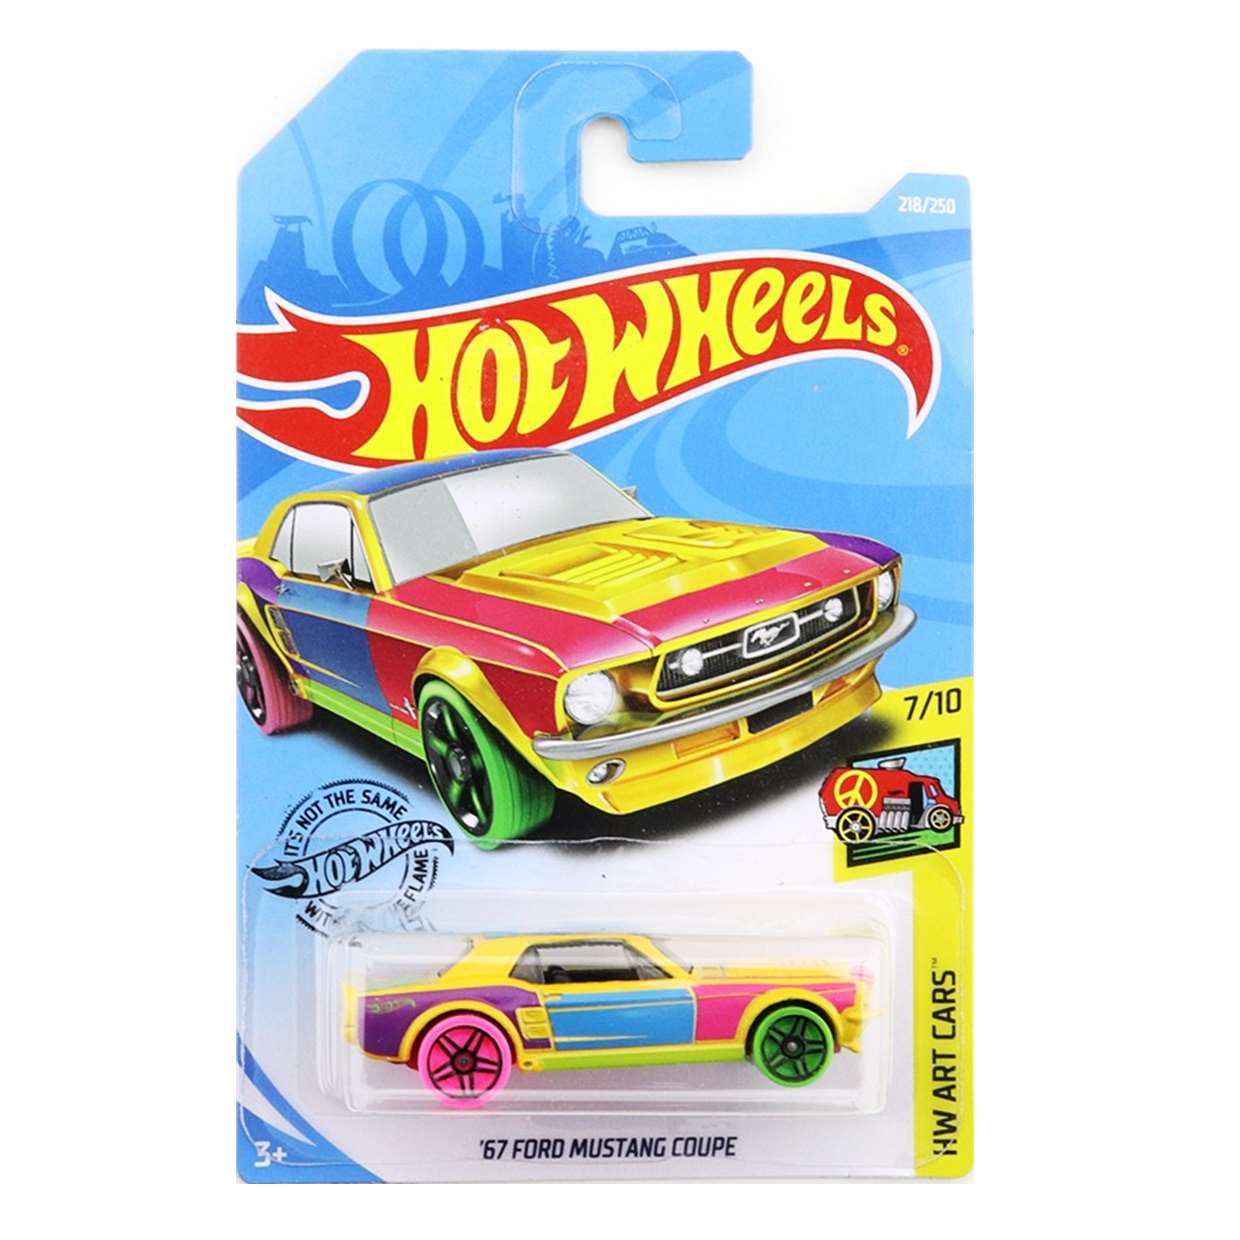 67 Ford Mustang Coupe 7/10 Hot Wheels Hw Art Cars